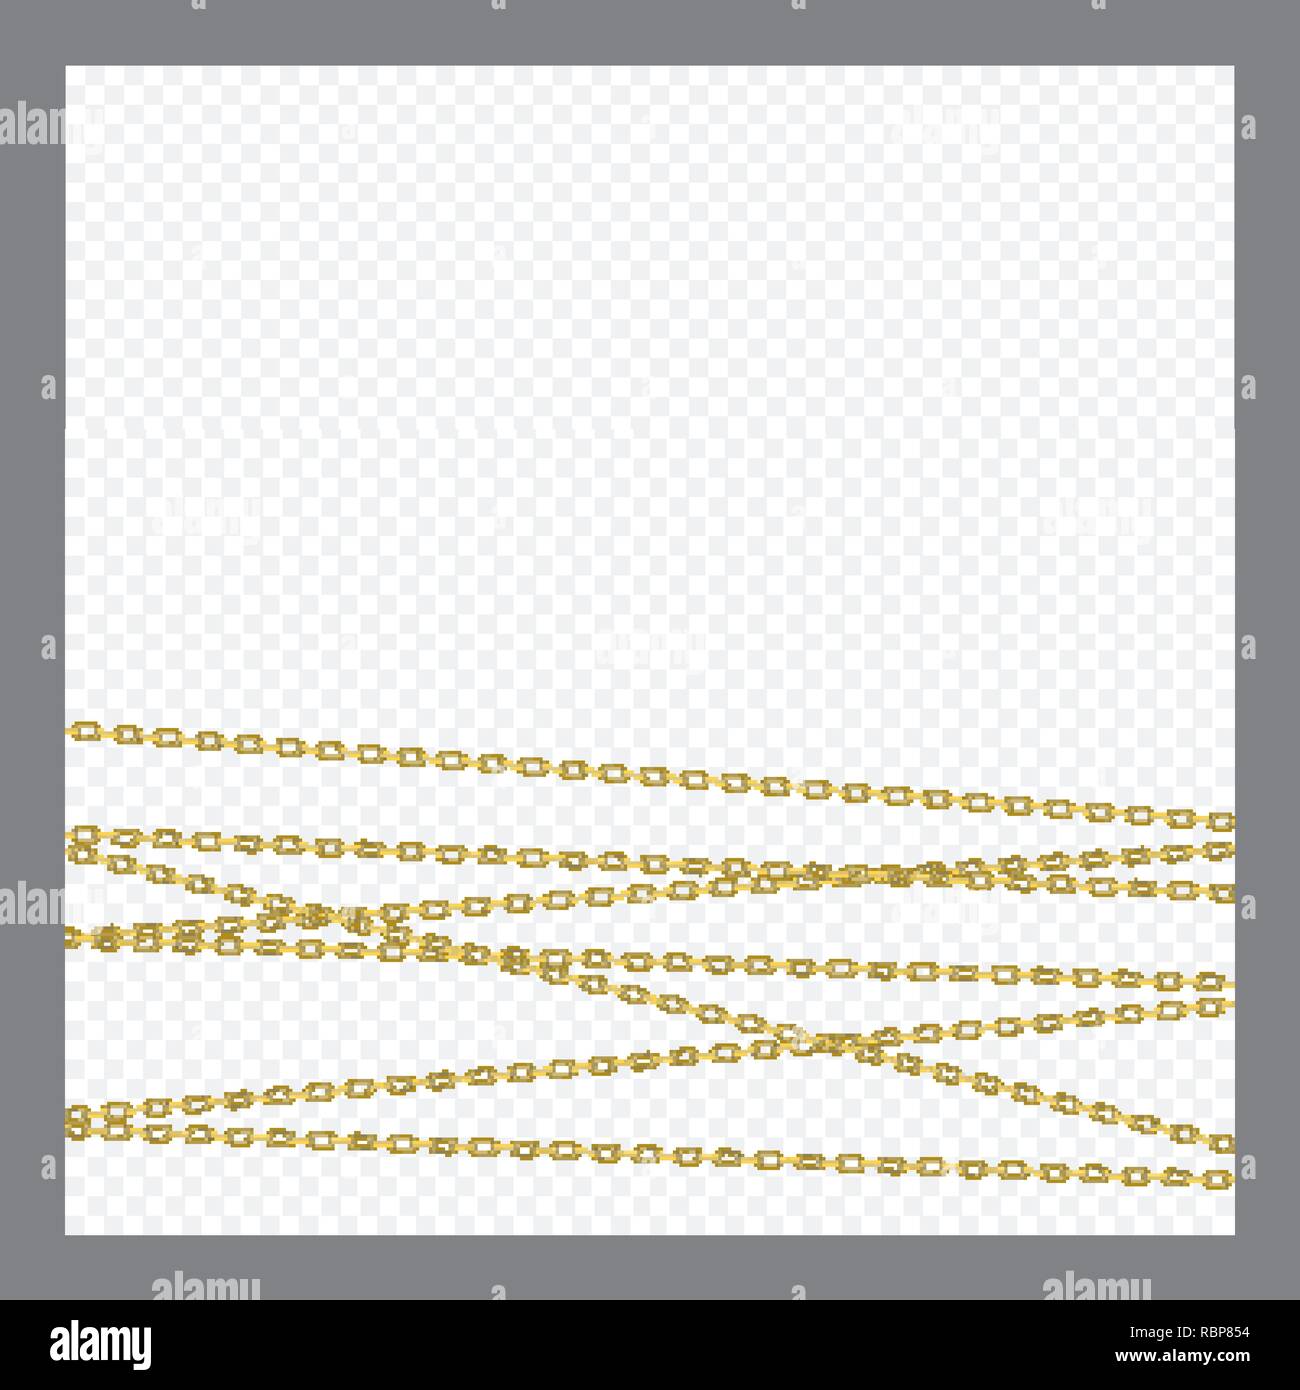 Abstract Golden or Bronze Color Chain Decorative element. Vector illustration Stock Vector